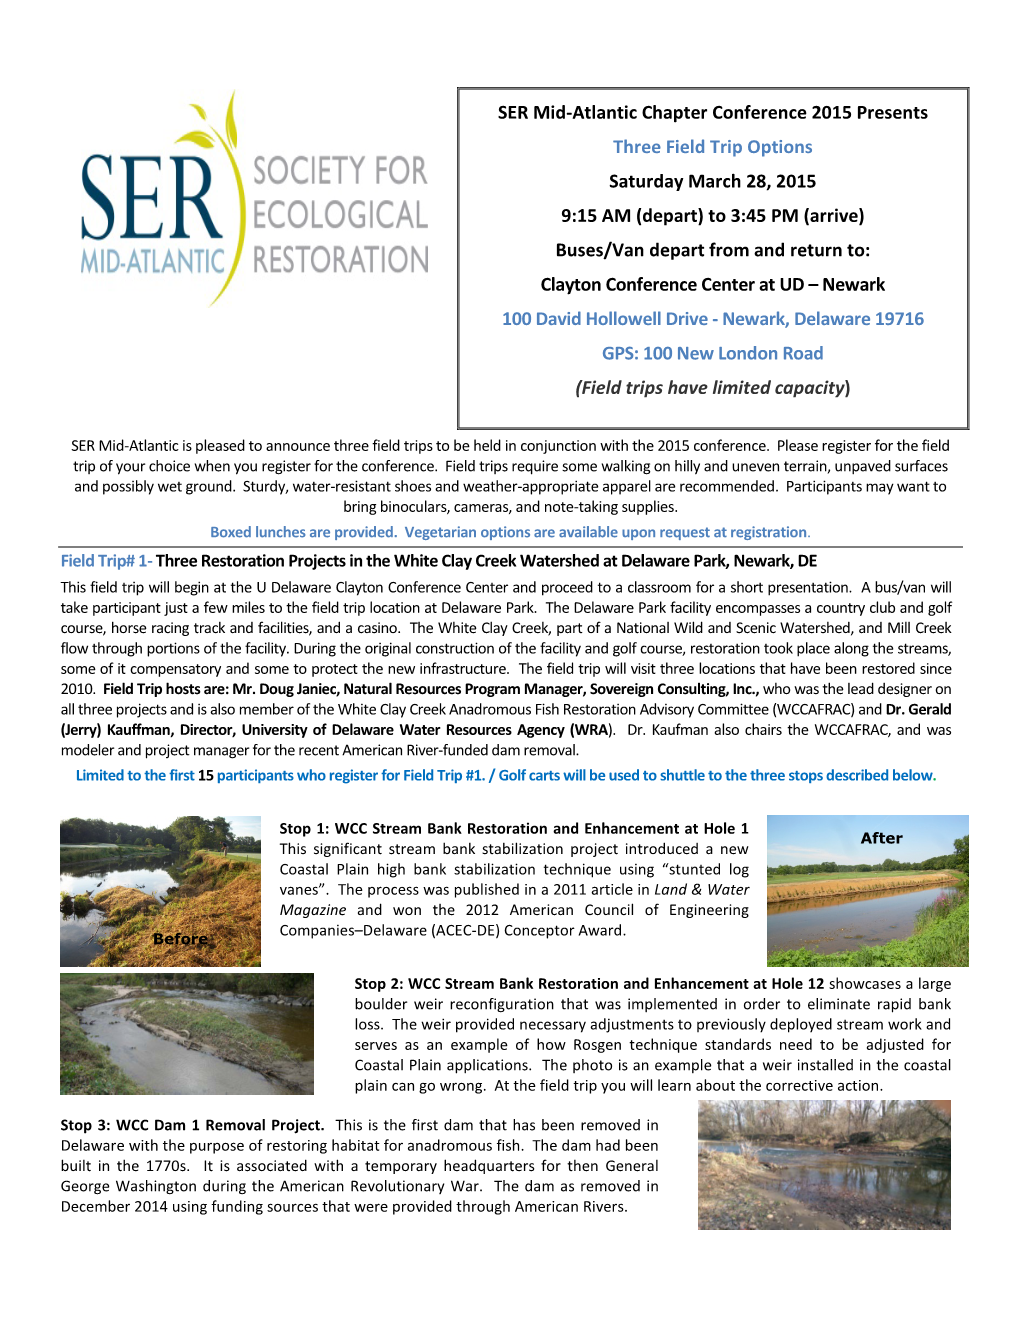 SER Mid-Atlantic Chapter Conference 2015 Presents Three Field Trip